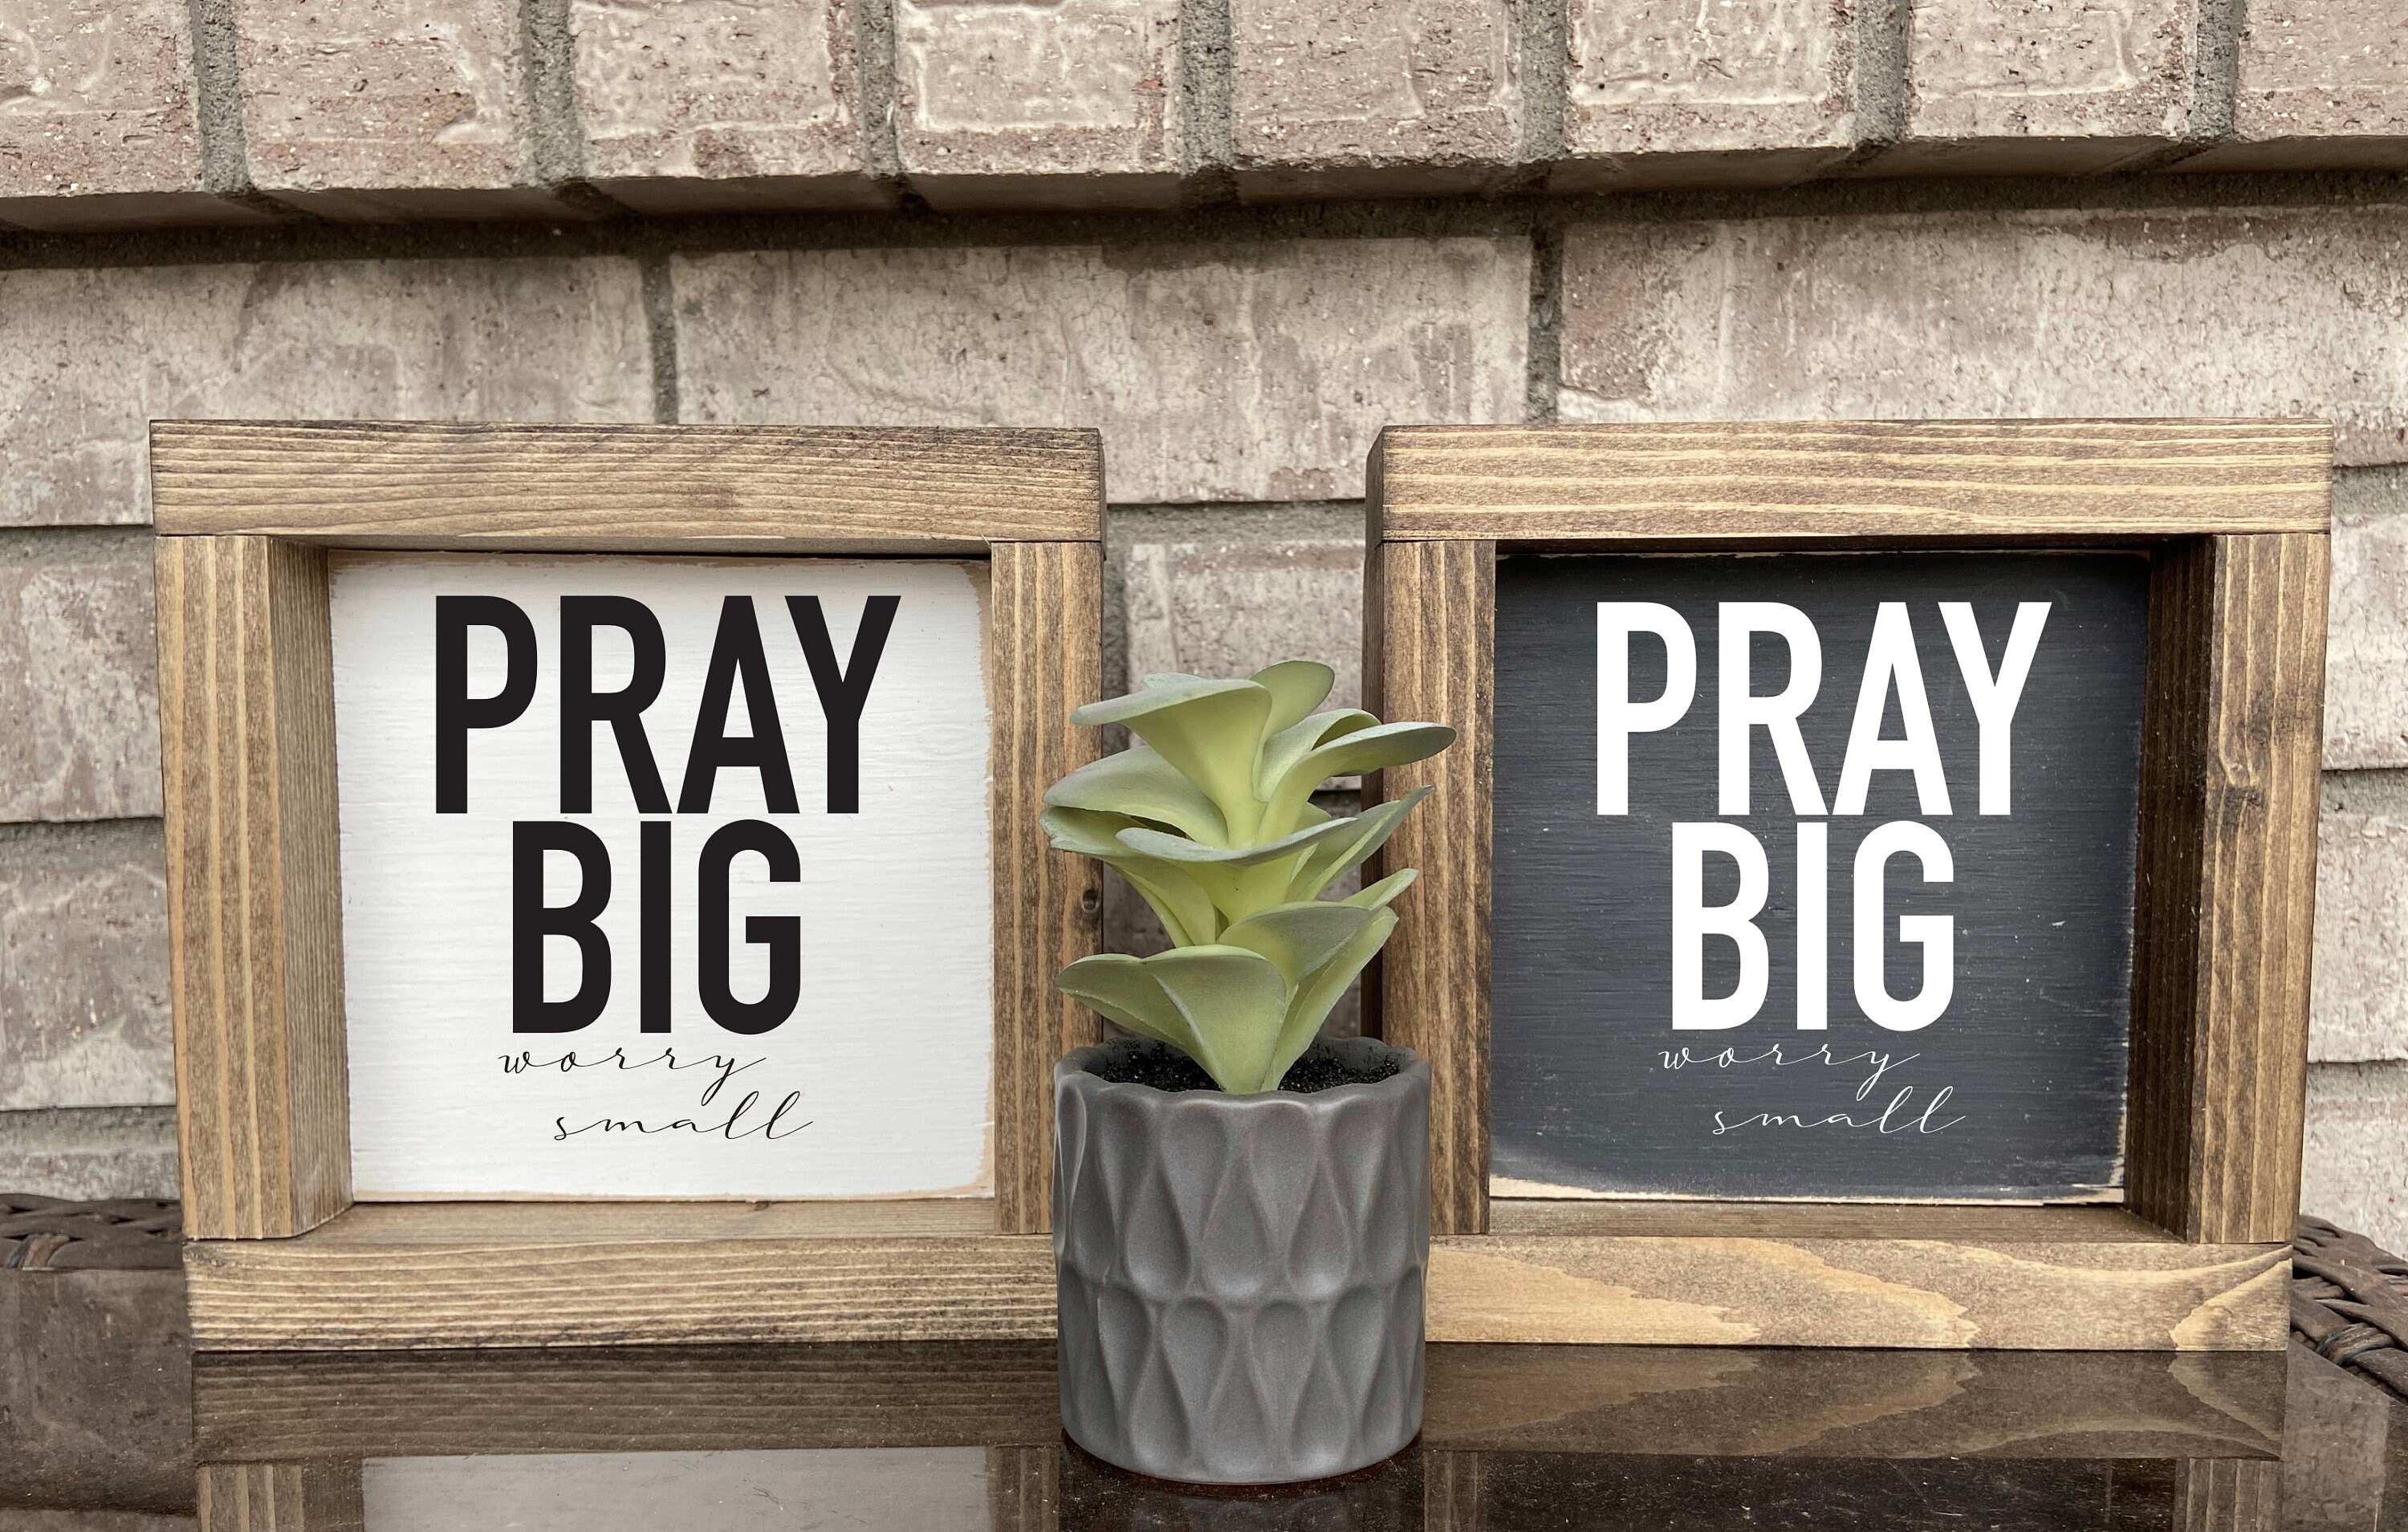 Divinity Boutique Pray Big Worry Small in Black 7 x 4.5 Wooden Decorative Tabletop Sign 